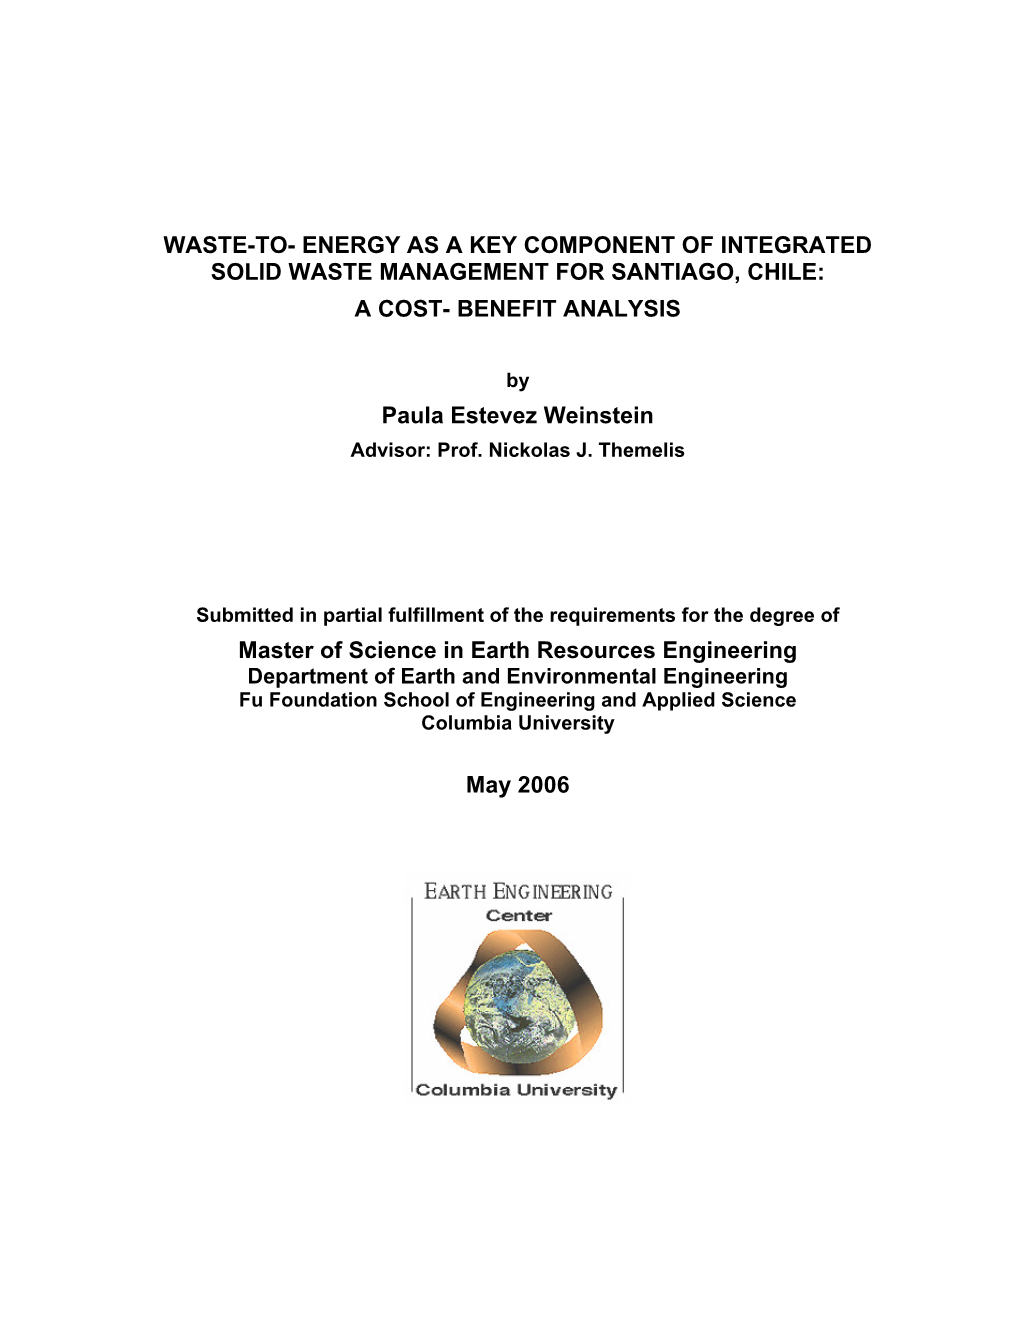 Energy As a Key Component of Integrated Solid Waste Management for Santiago, Chile: a Cost- Benefit Analysis